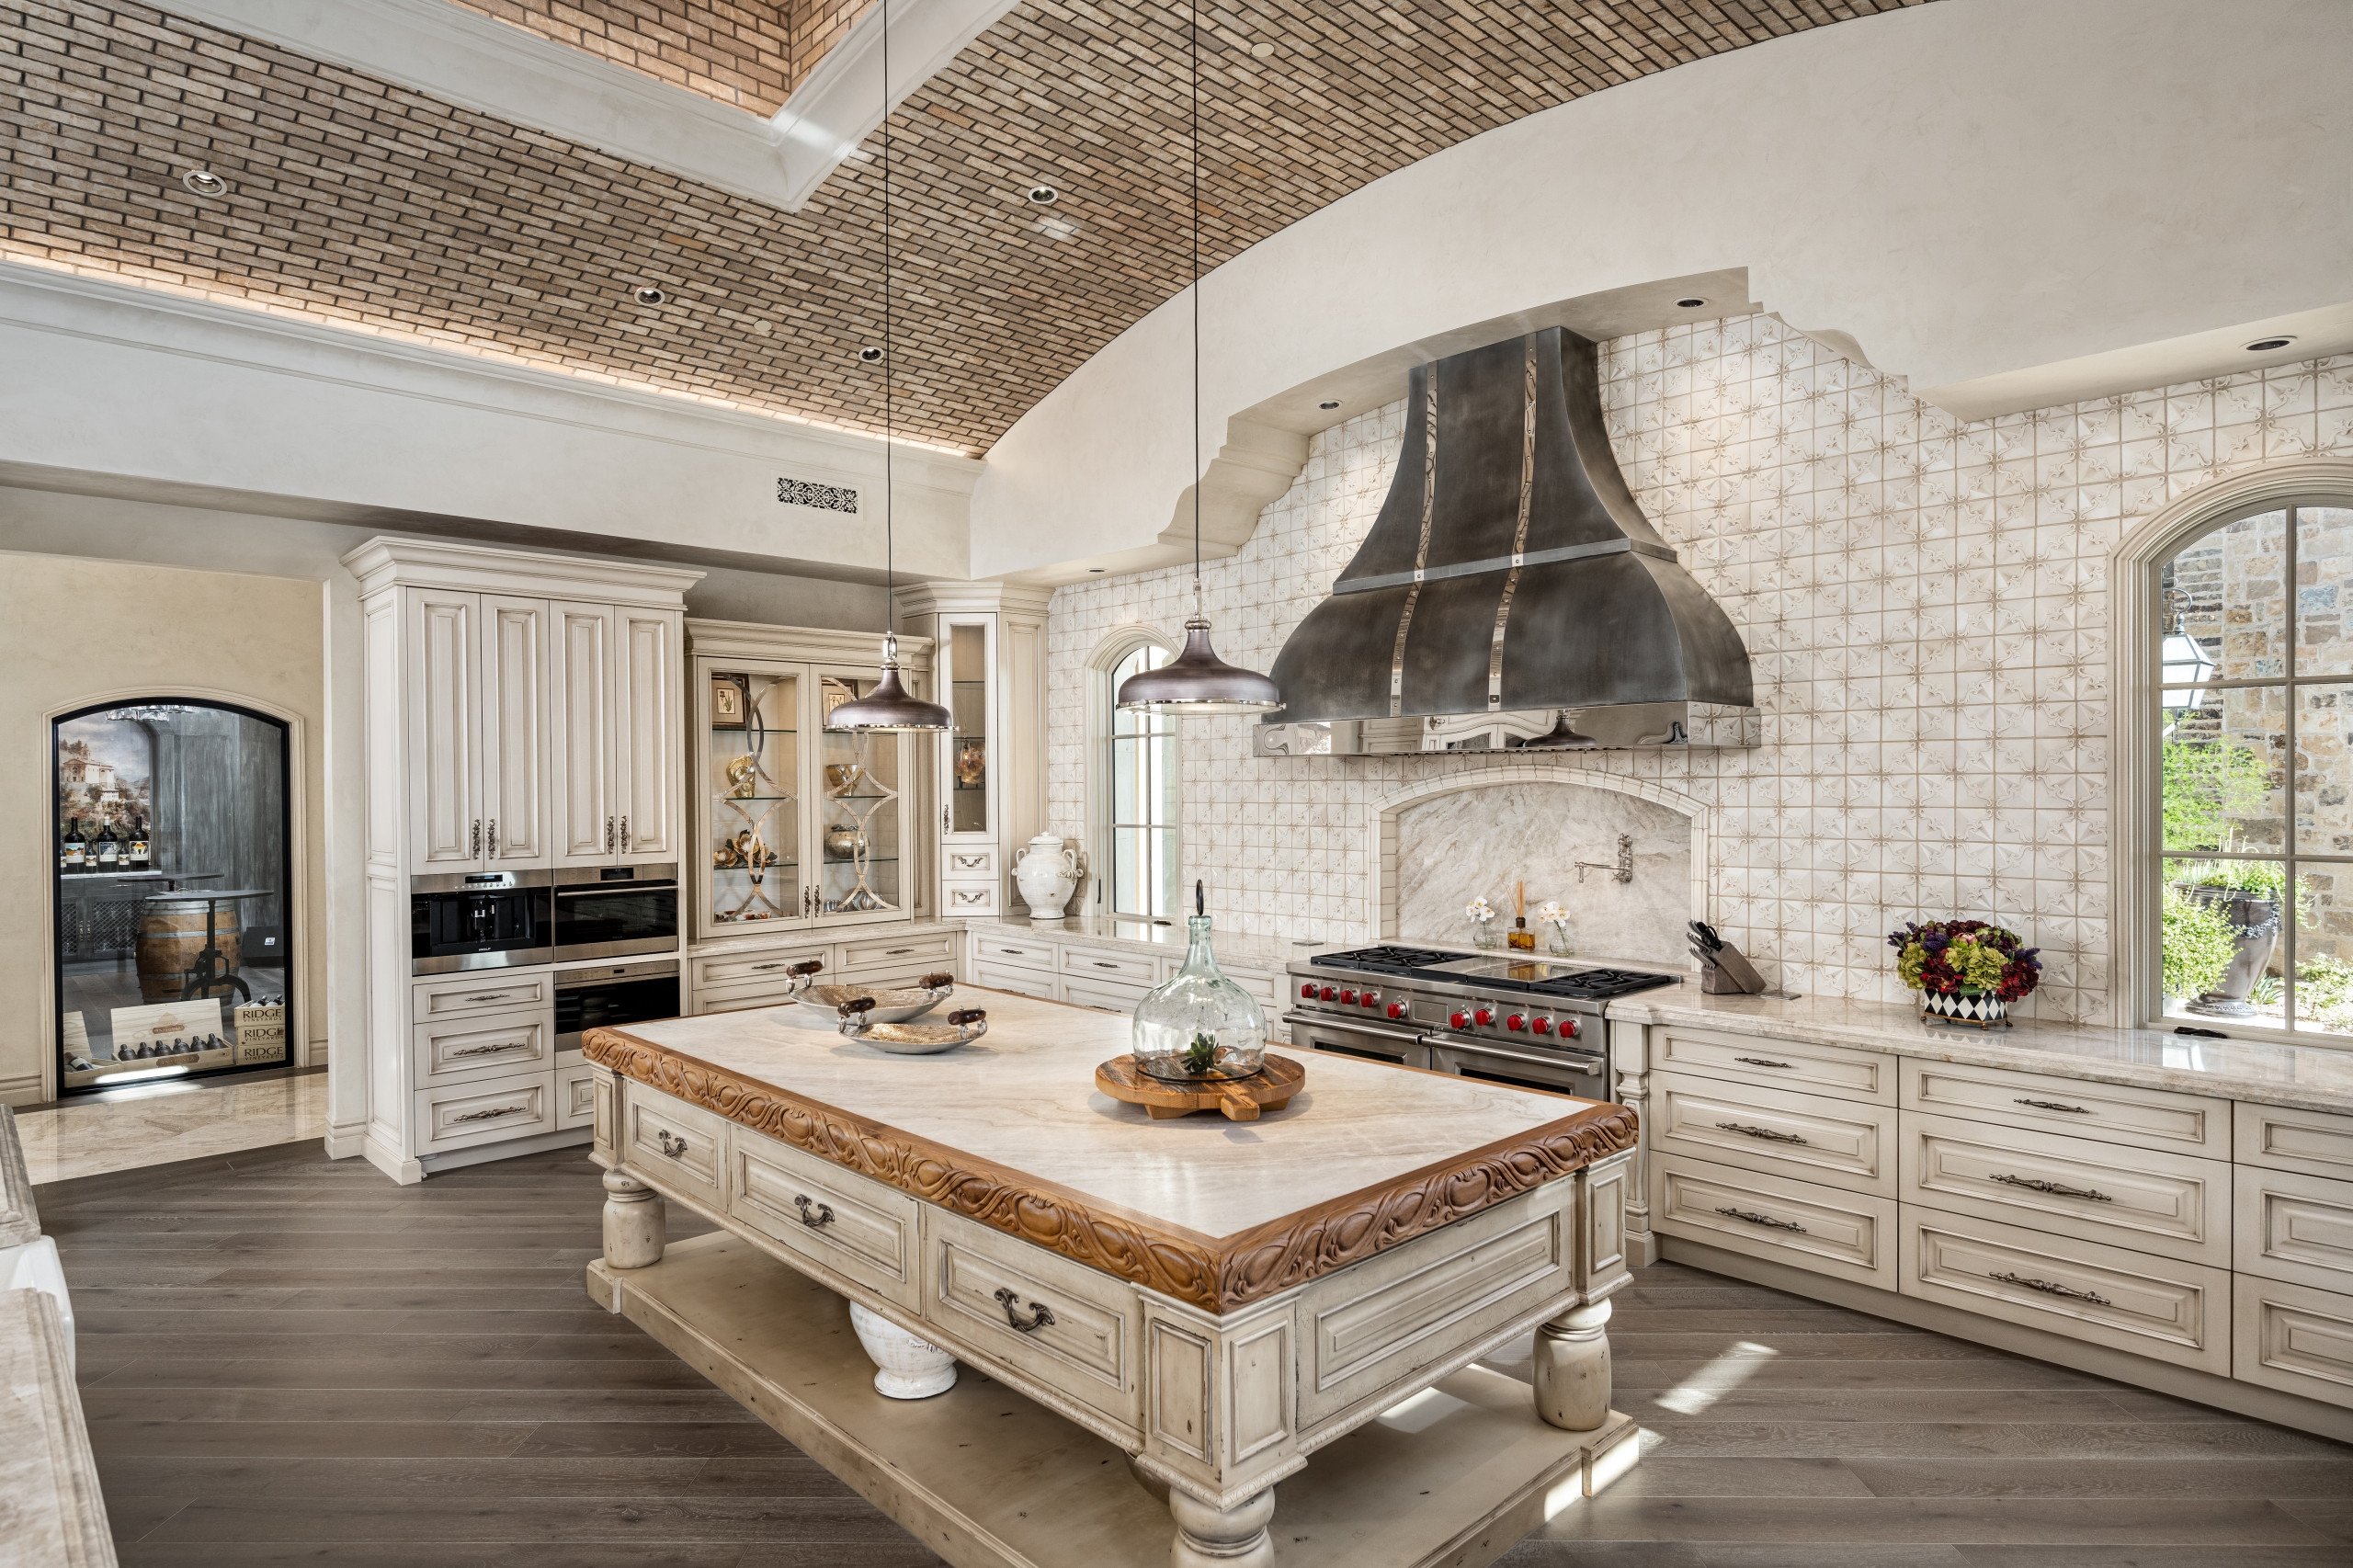 https://foter.com/photos/424/elegant-french-country-kitchen-with-high-ceilings.jpg